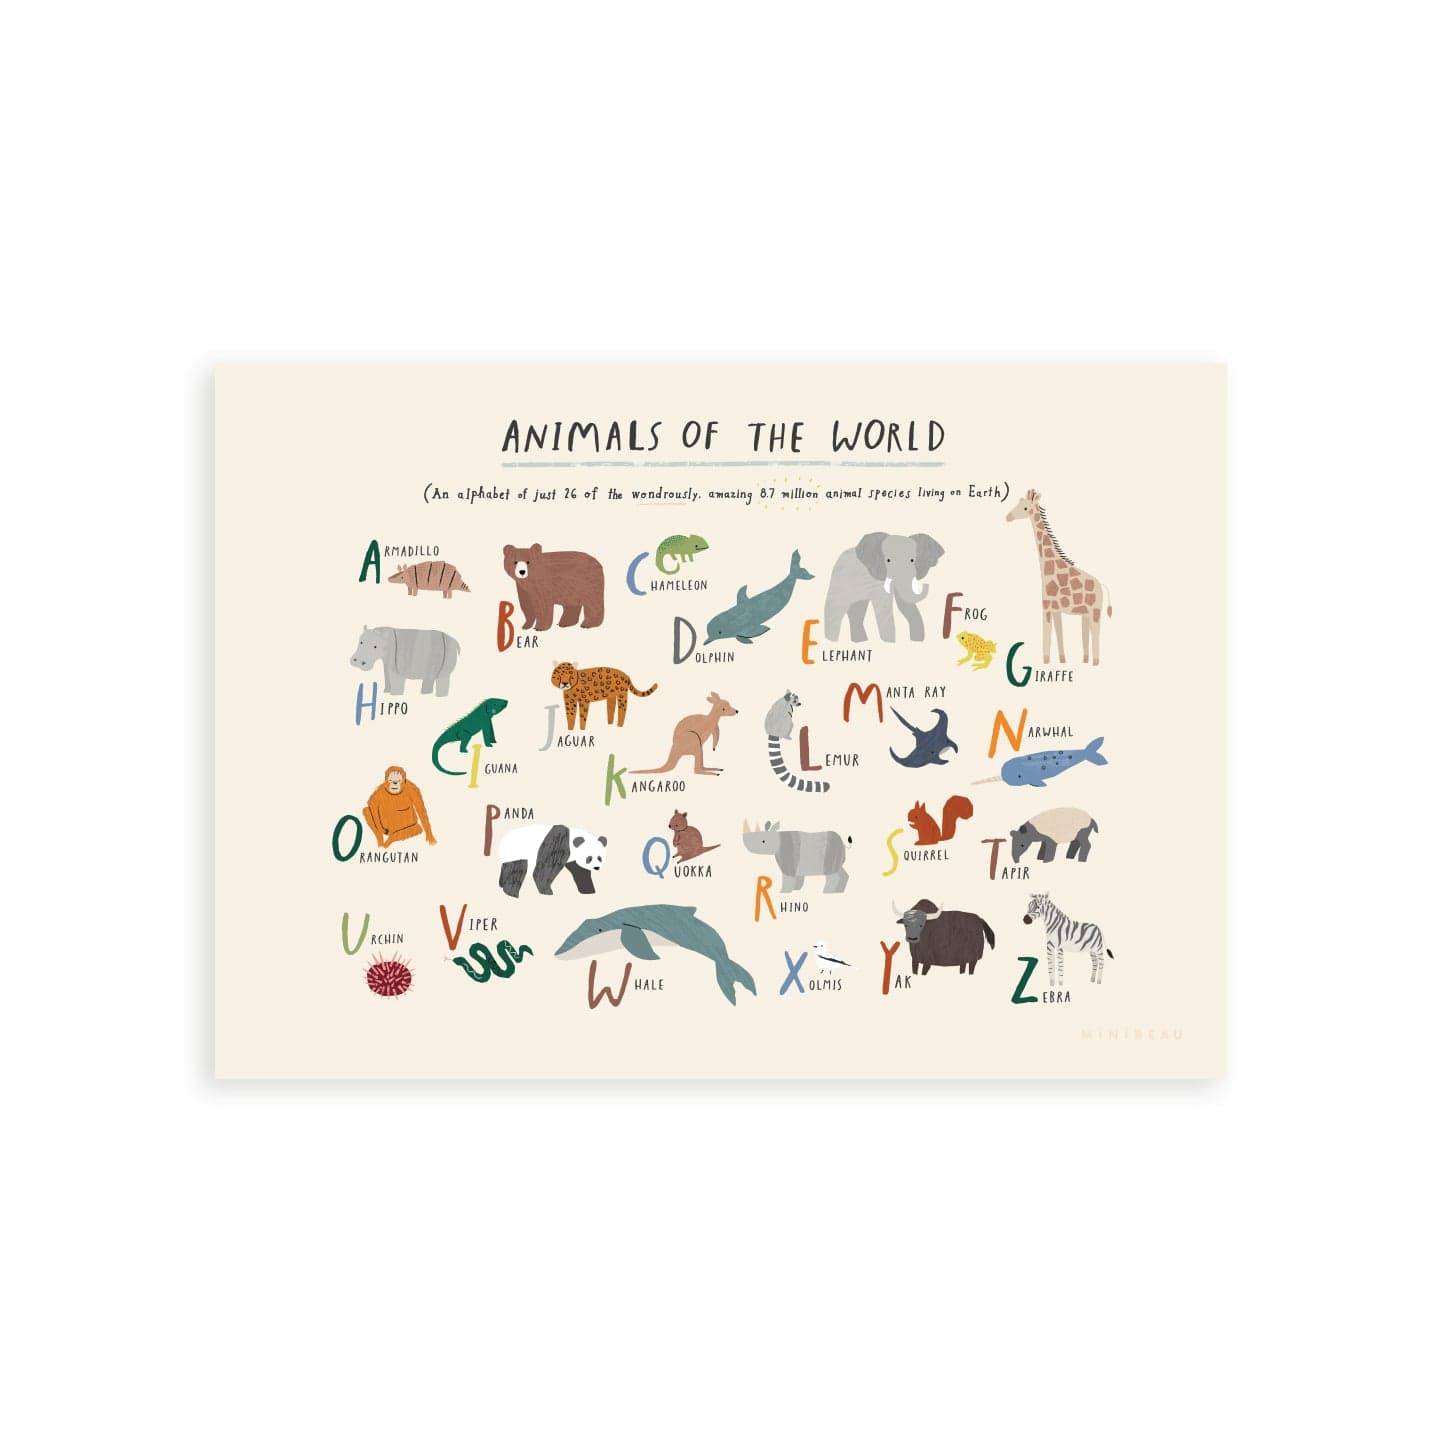 Our animals of the world art print consists of pictures of animals from around the world representing each letter of the alphabet, including a panda, kangaroo, viper and chameleon. Has text at the top saying animals of the world in large font and the text - An alphabet of just 26 of the wondrously, amazing 8.7 million animal species living on earth in brackets as a sub heading.